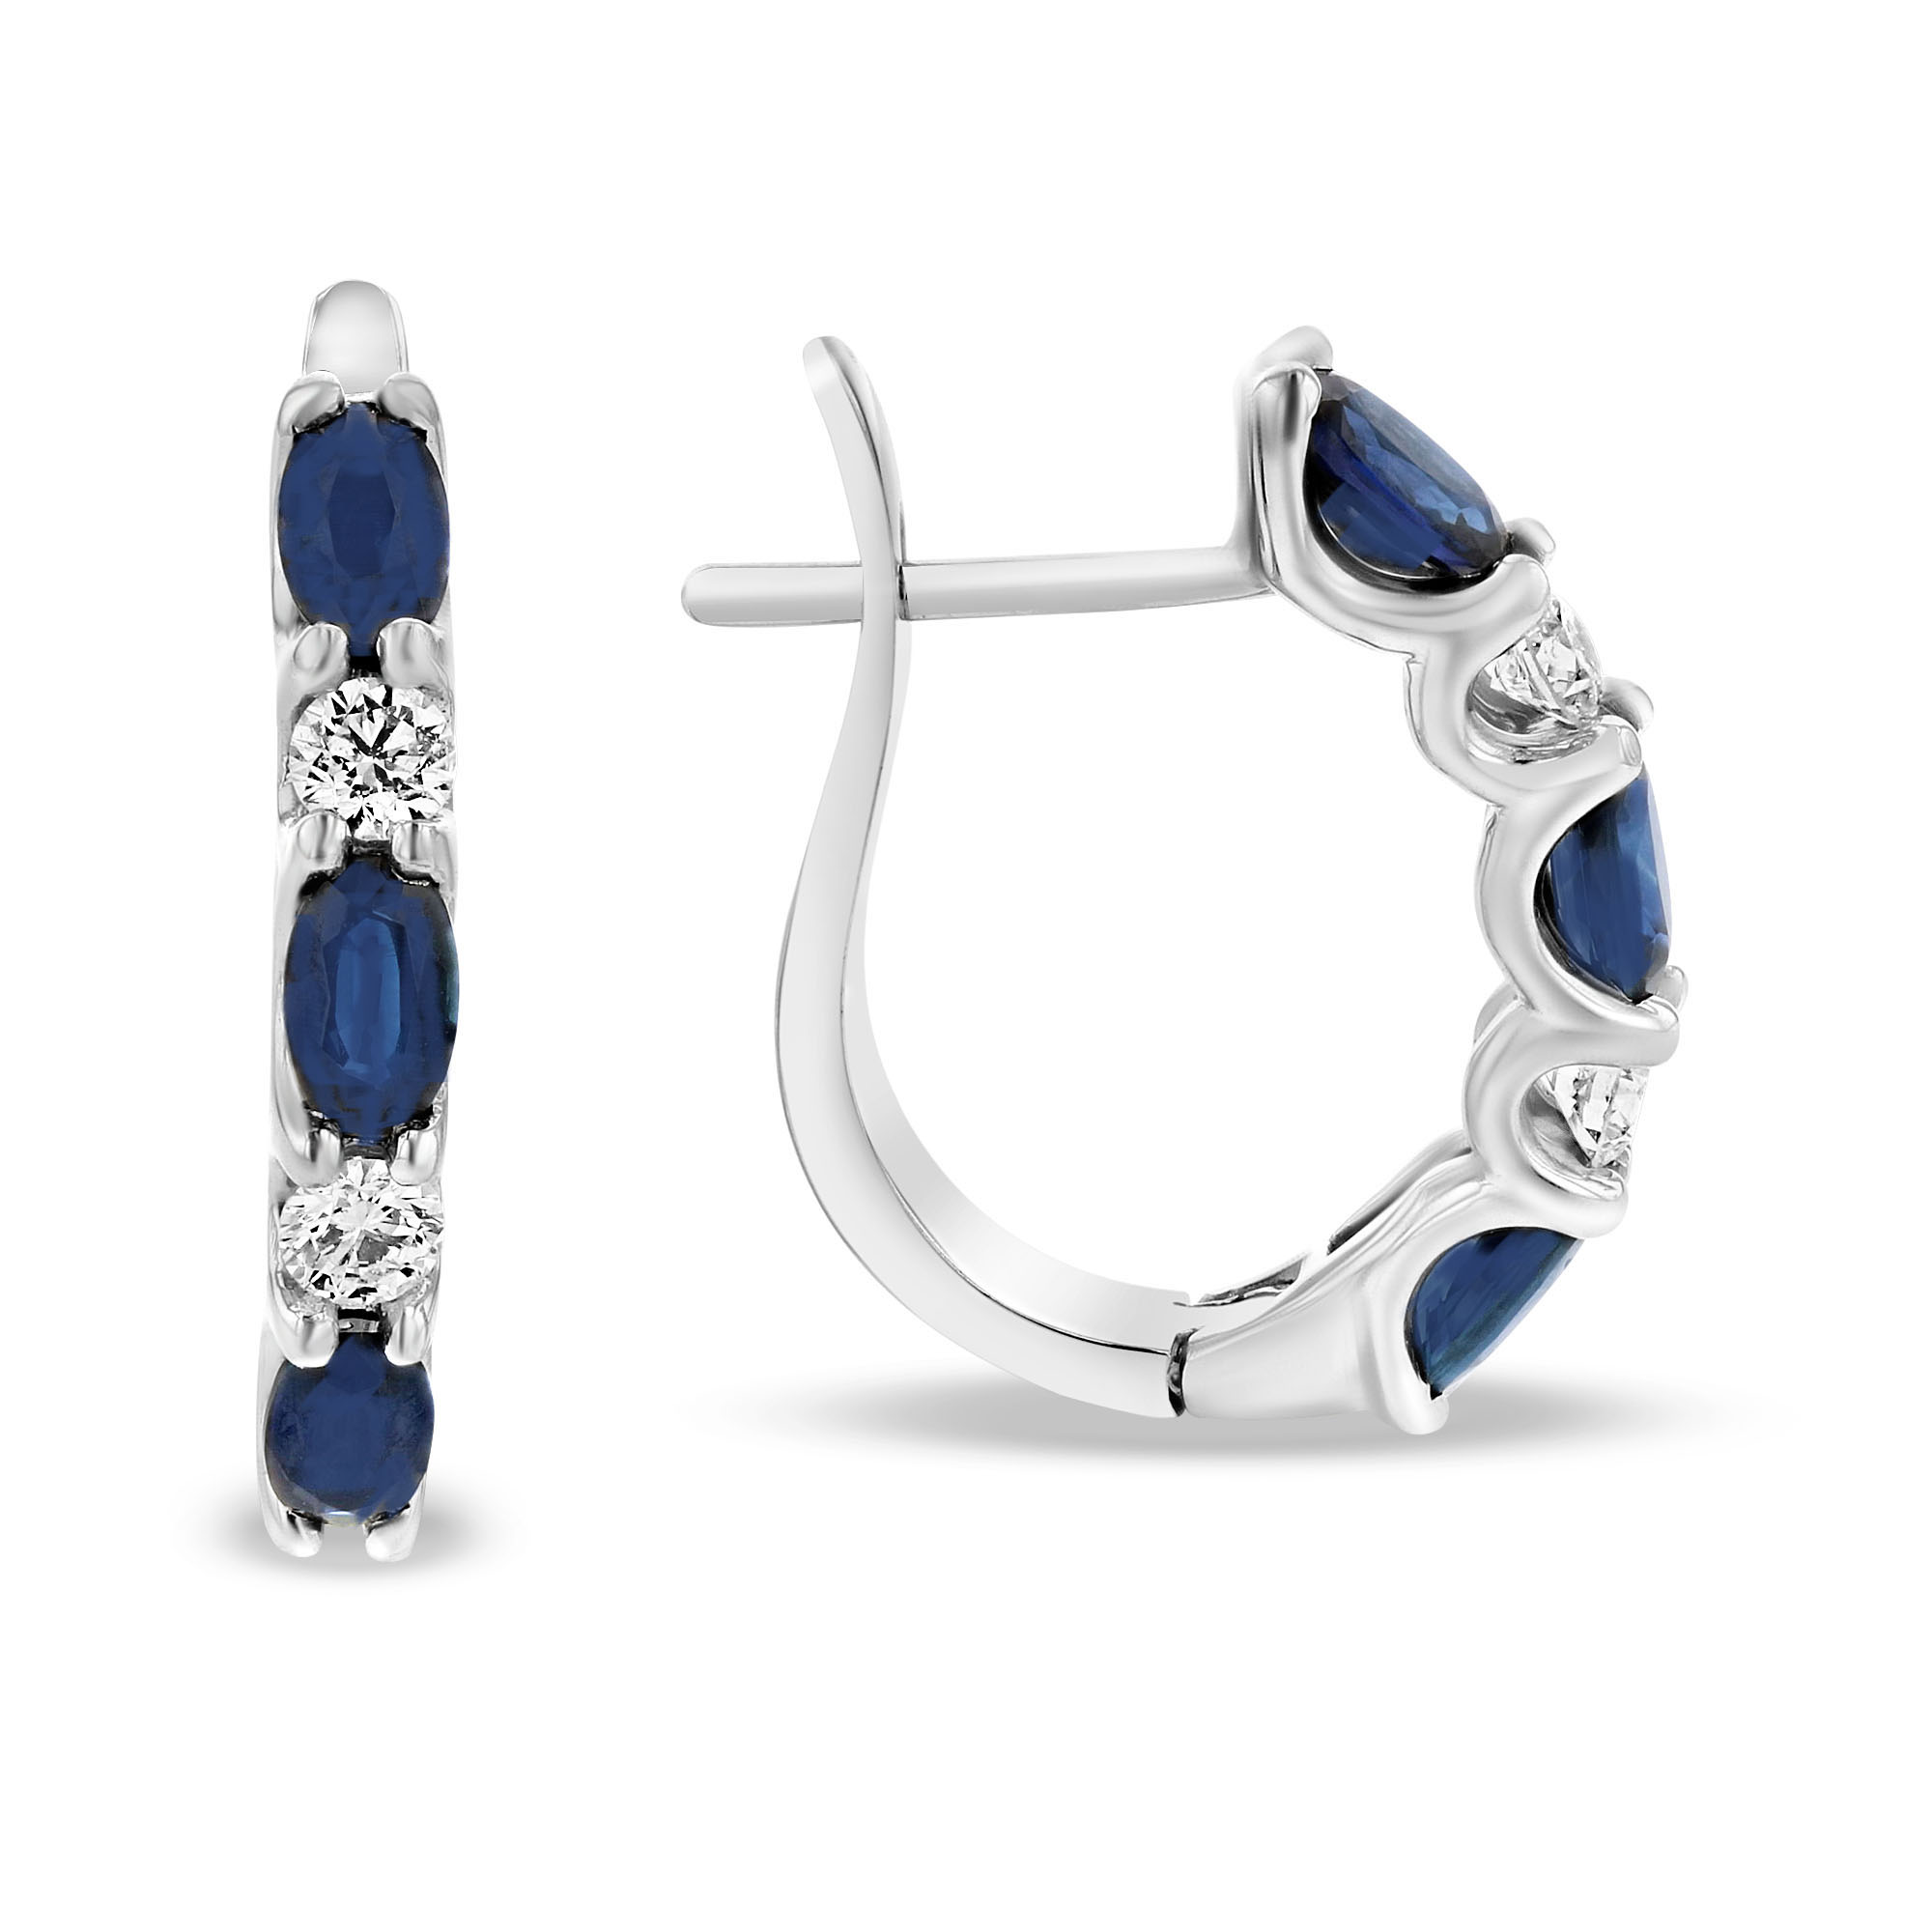 View 2.05ctw Diamond and Sapphire Hoop Earrings in 14k White Gold